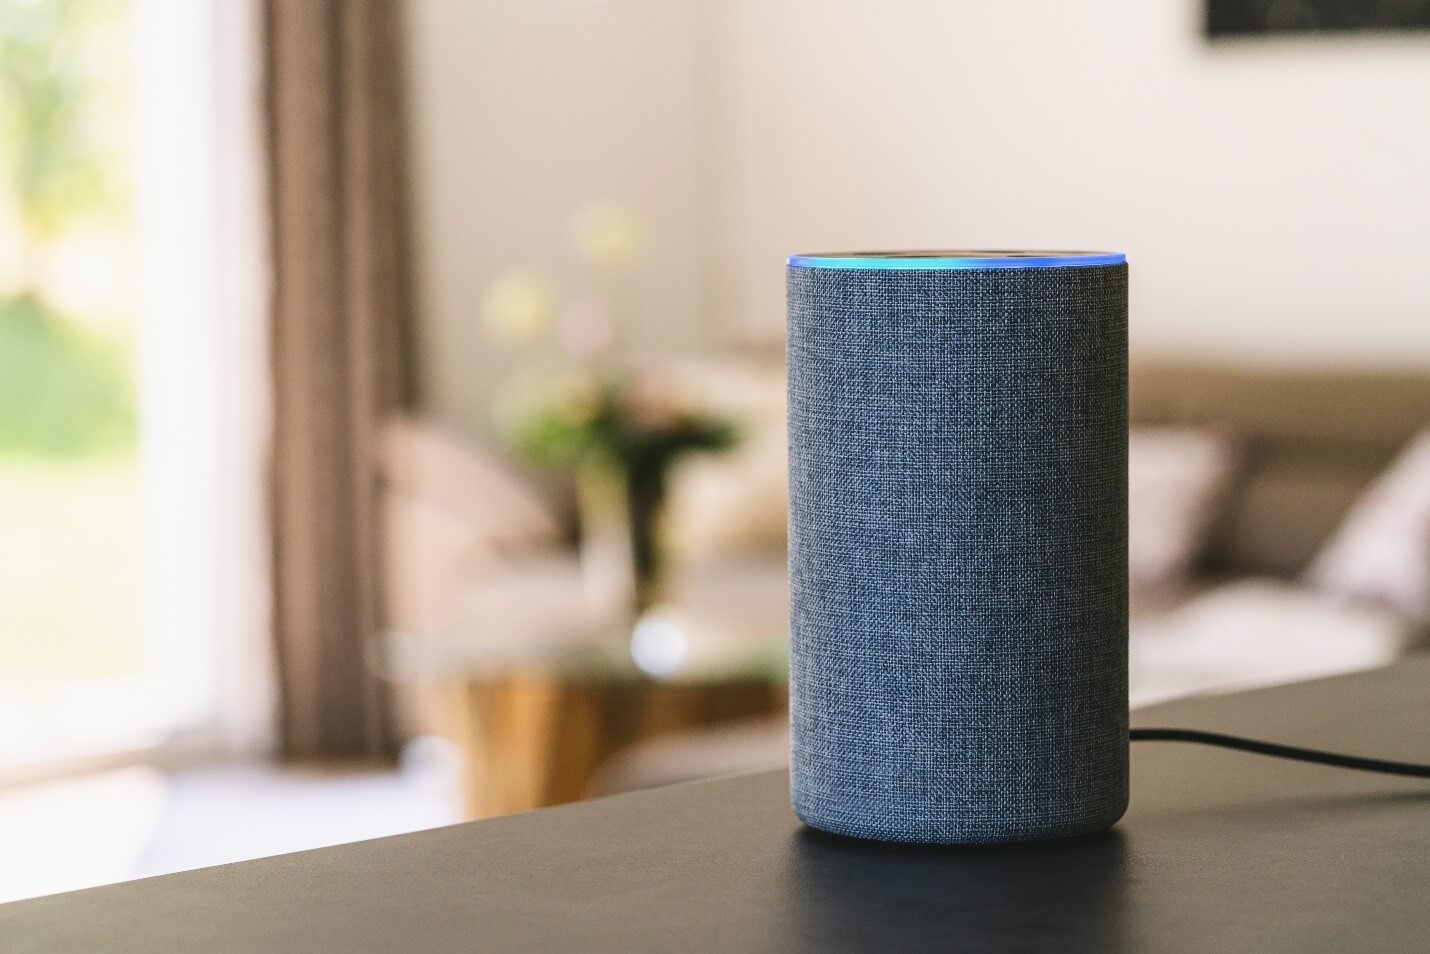 Amazon's Echo devices are officially sharing your internet